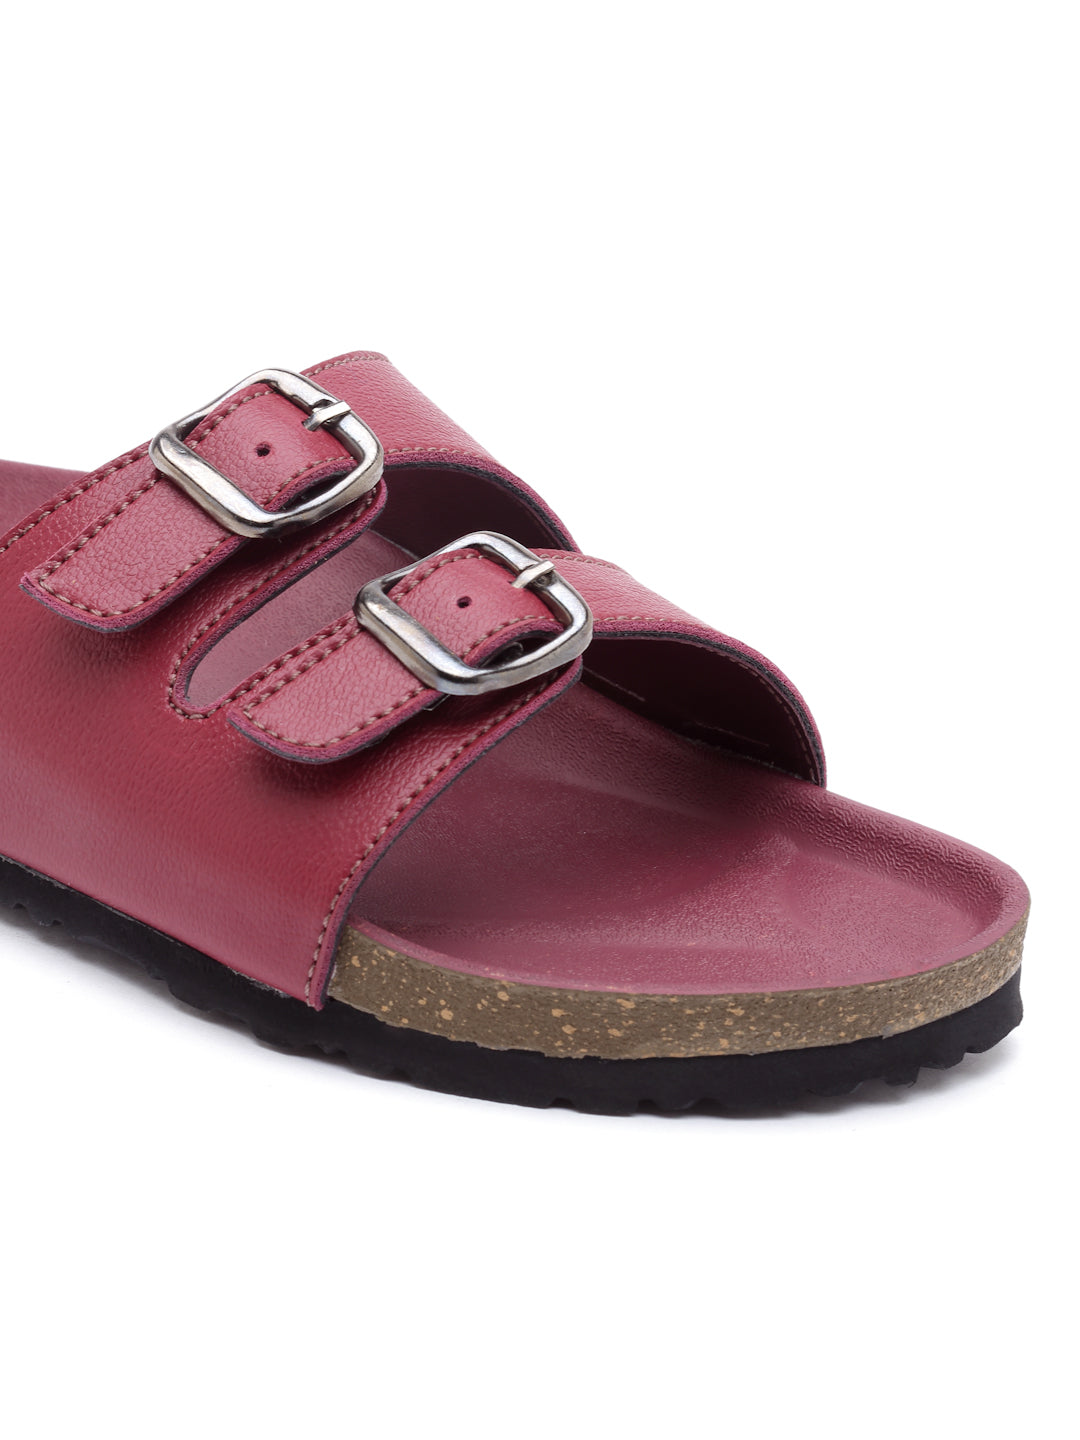 Women's Maroon Synthetic Leather Casual Sandal